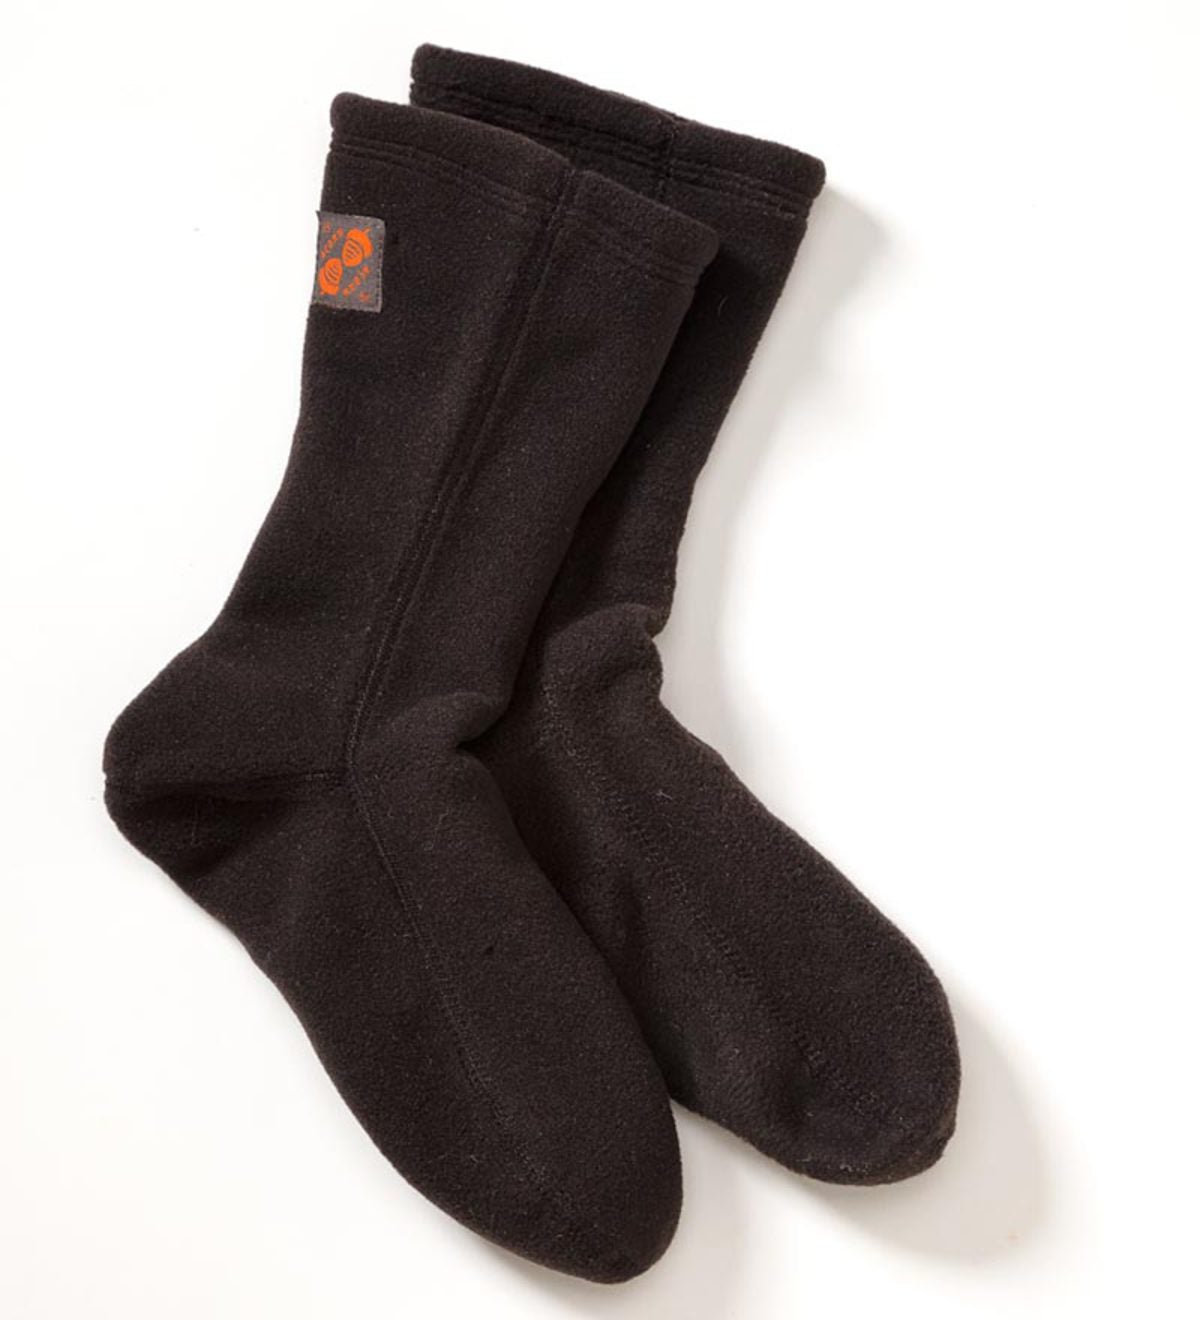 Acorn® Fleece Socks For Men and Women - Charcoal Cable - X-Small